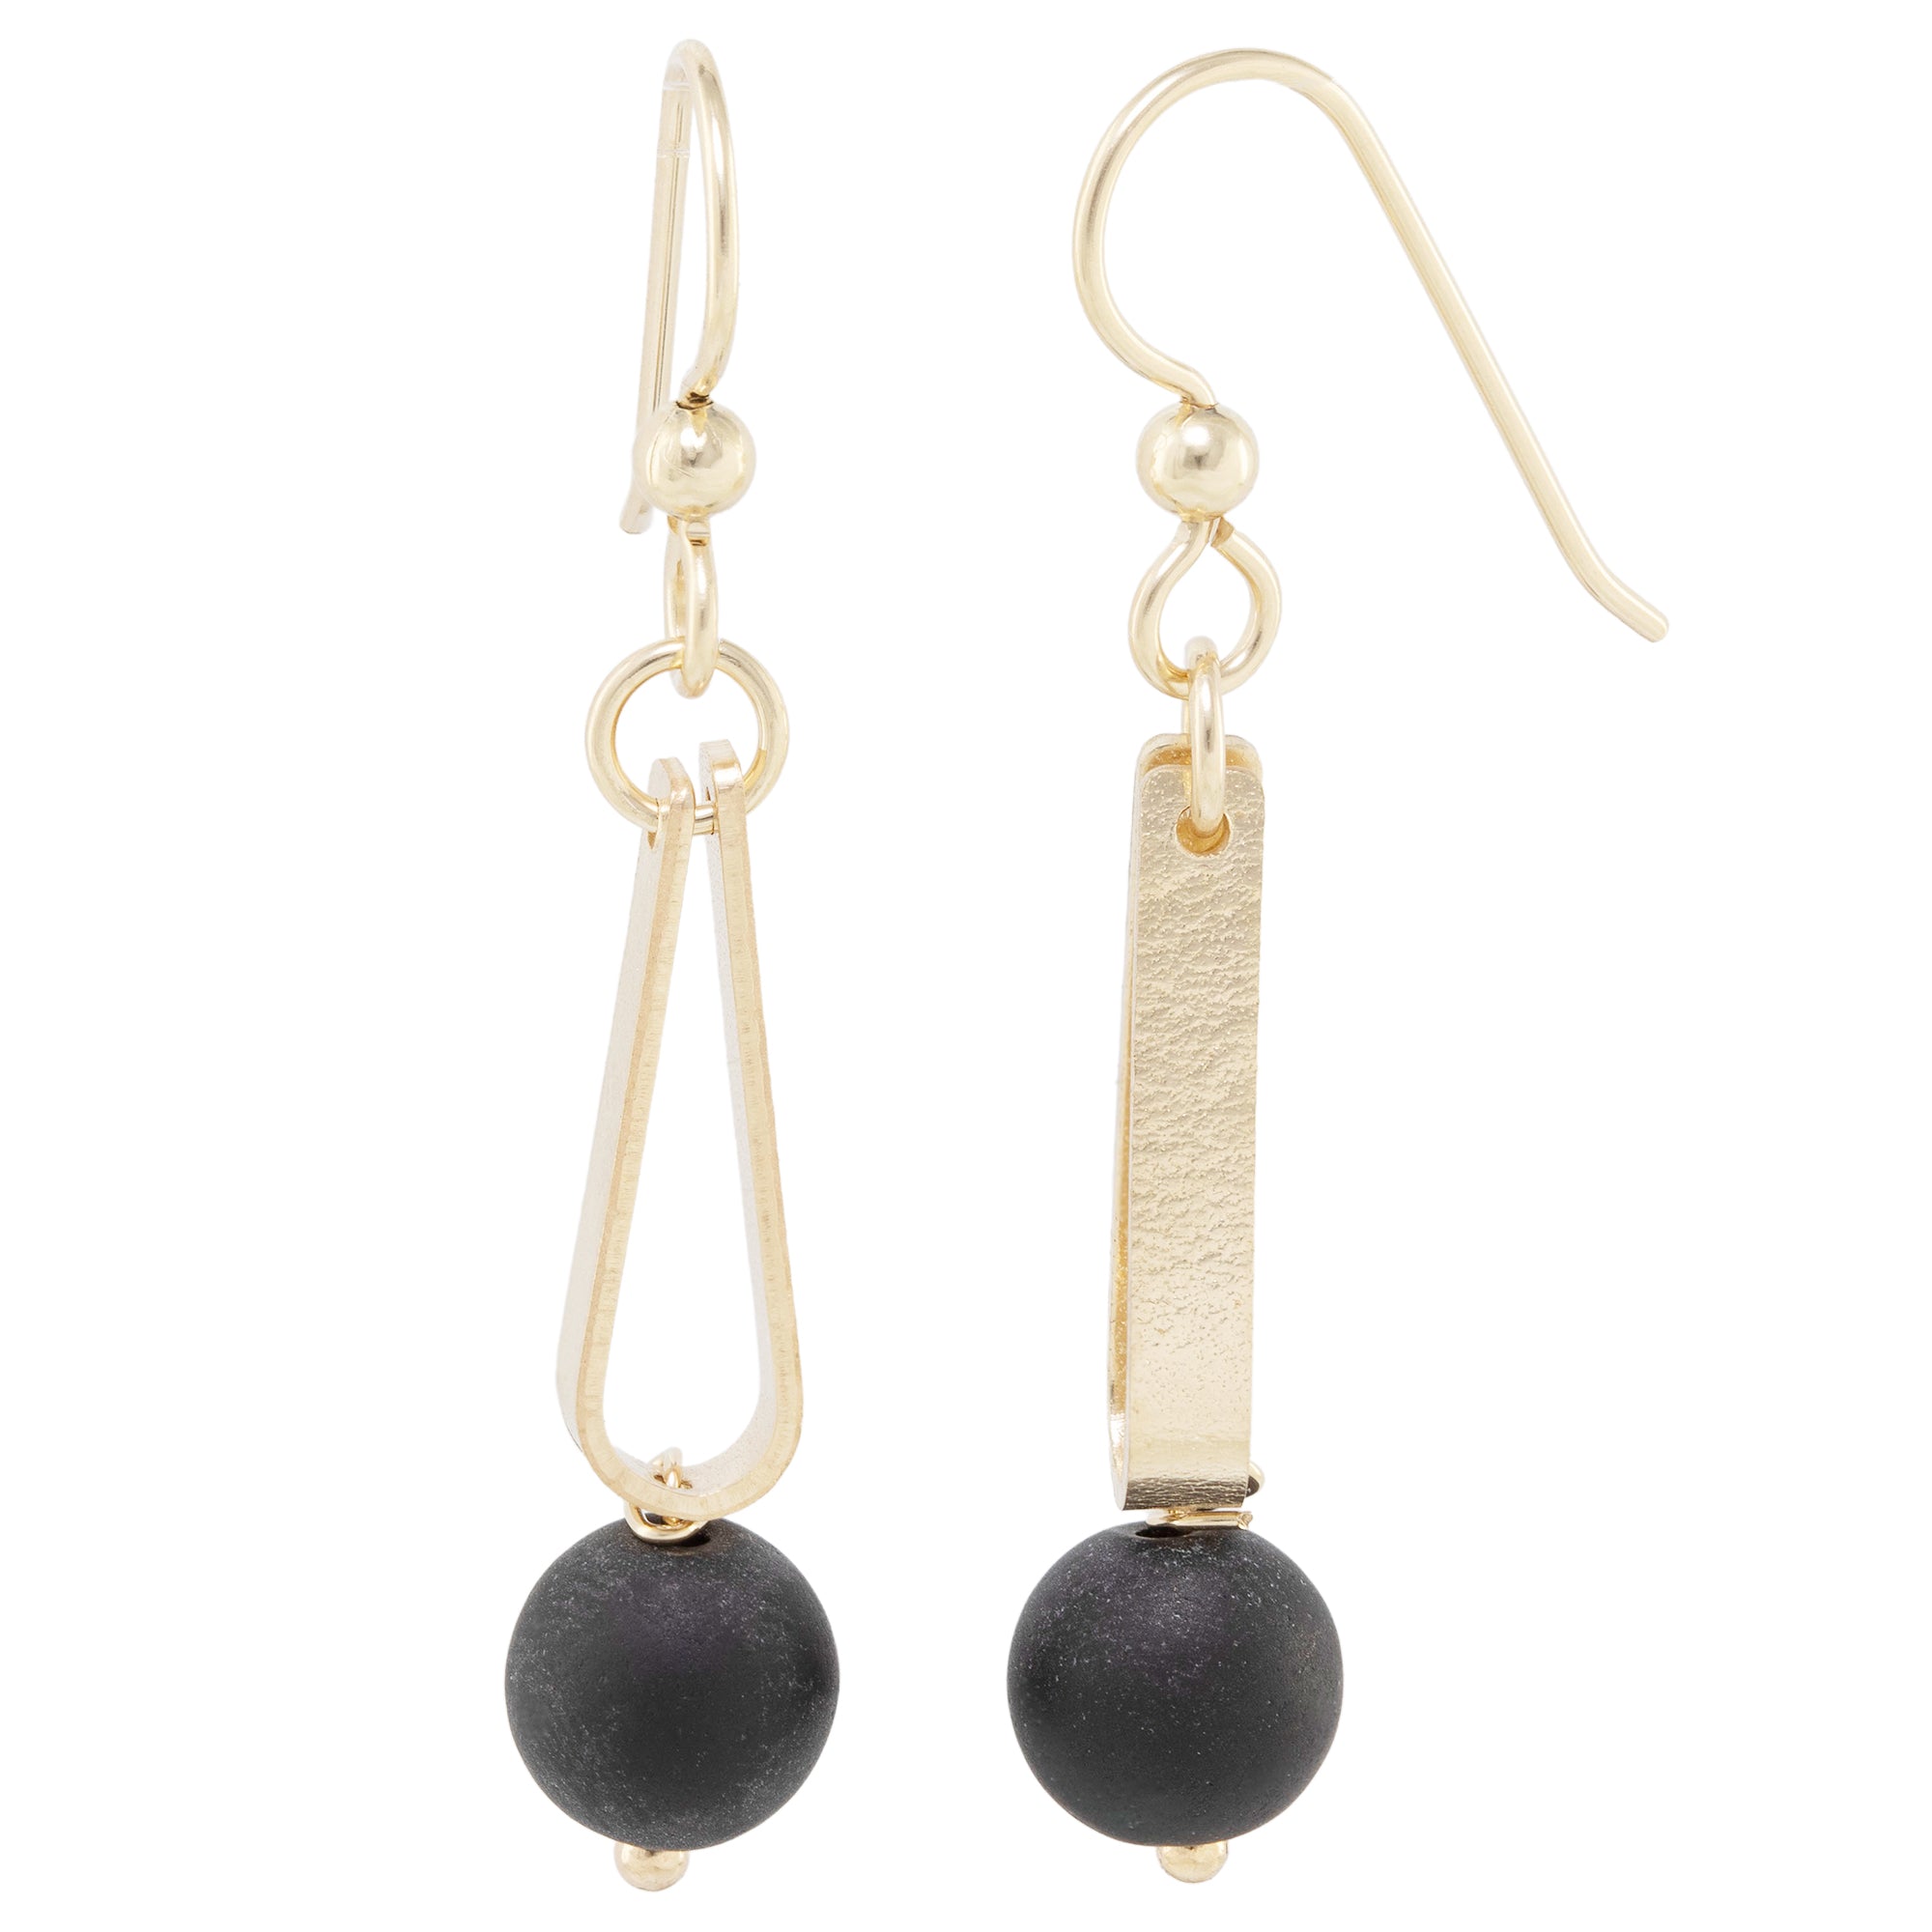 Matte Black Round Recycled Glass Ball and 14K Gold Fill Teardrop Shaped Dangle Earrings